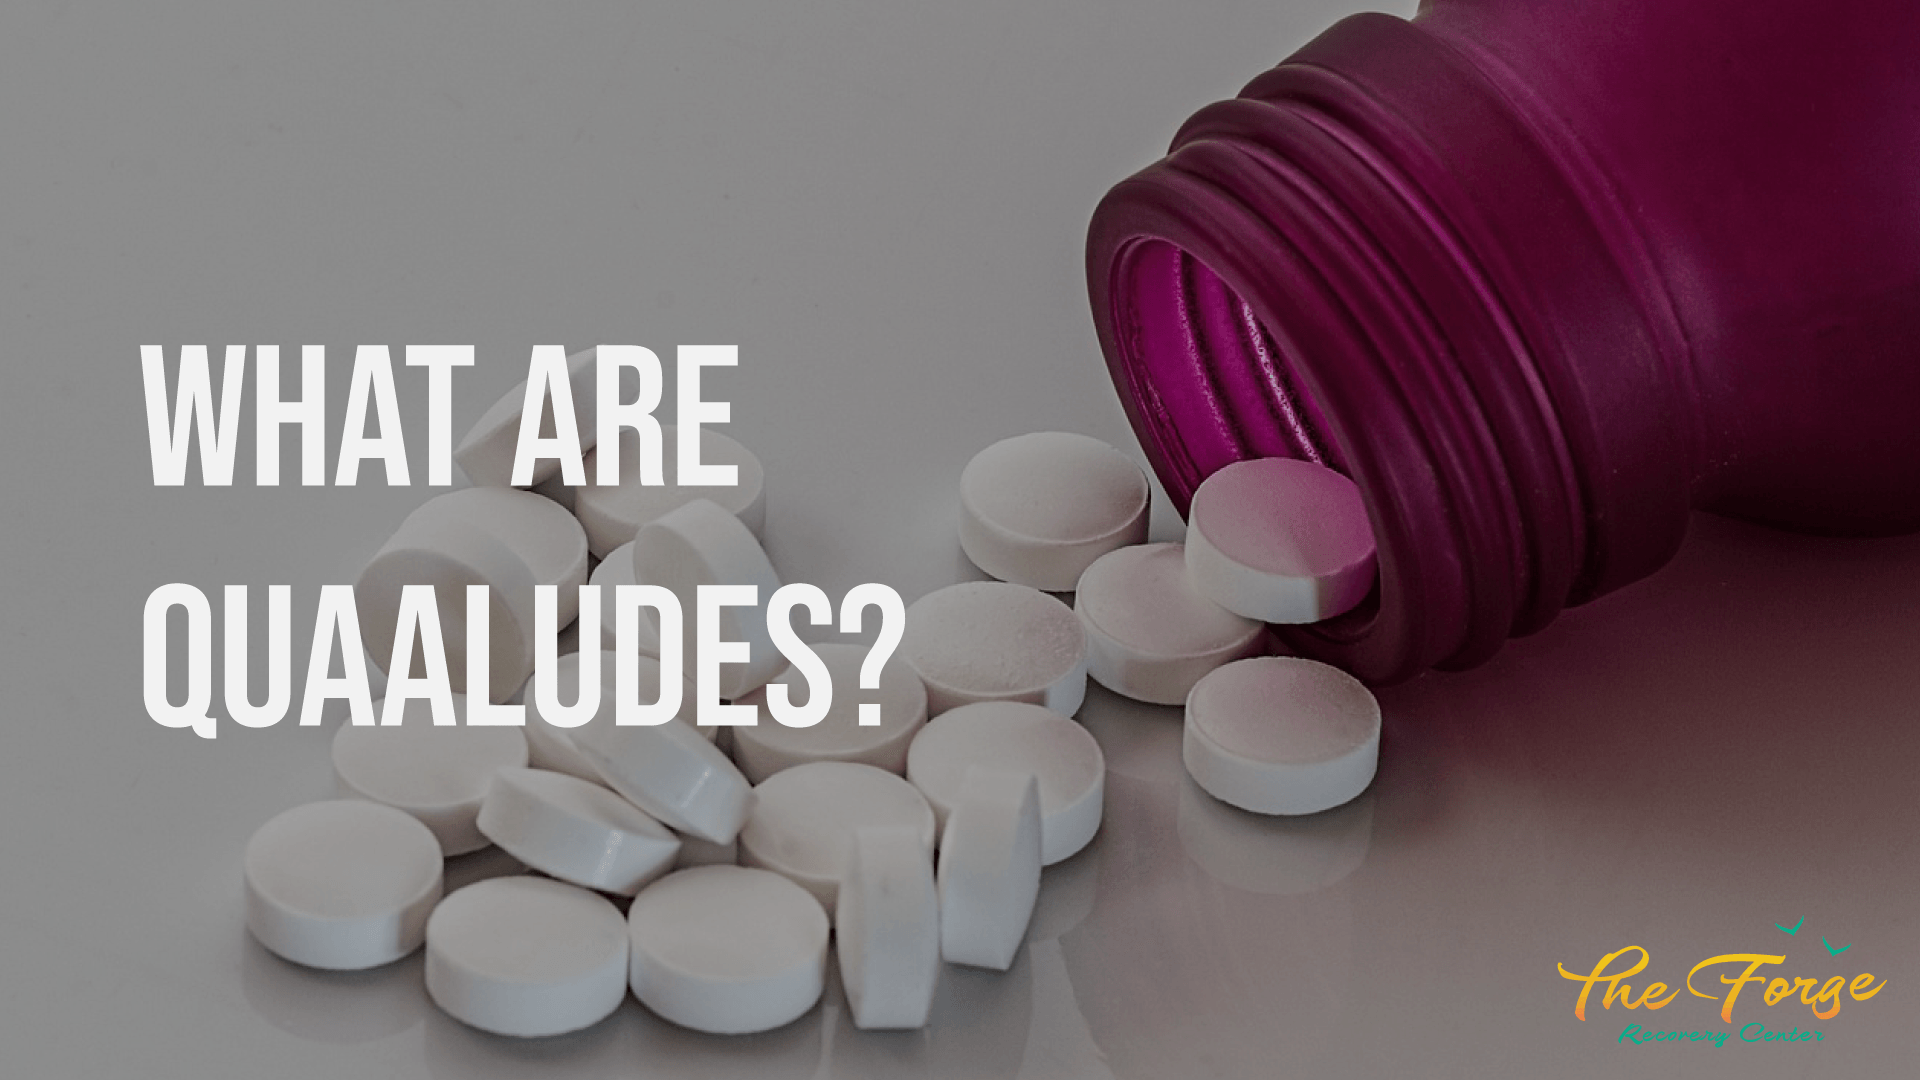 What are Quaaludes?